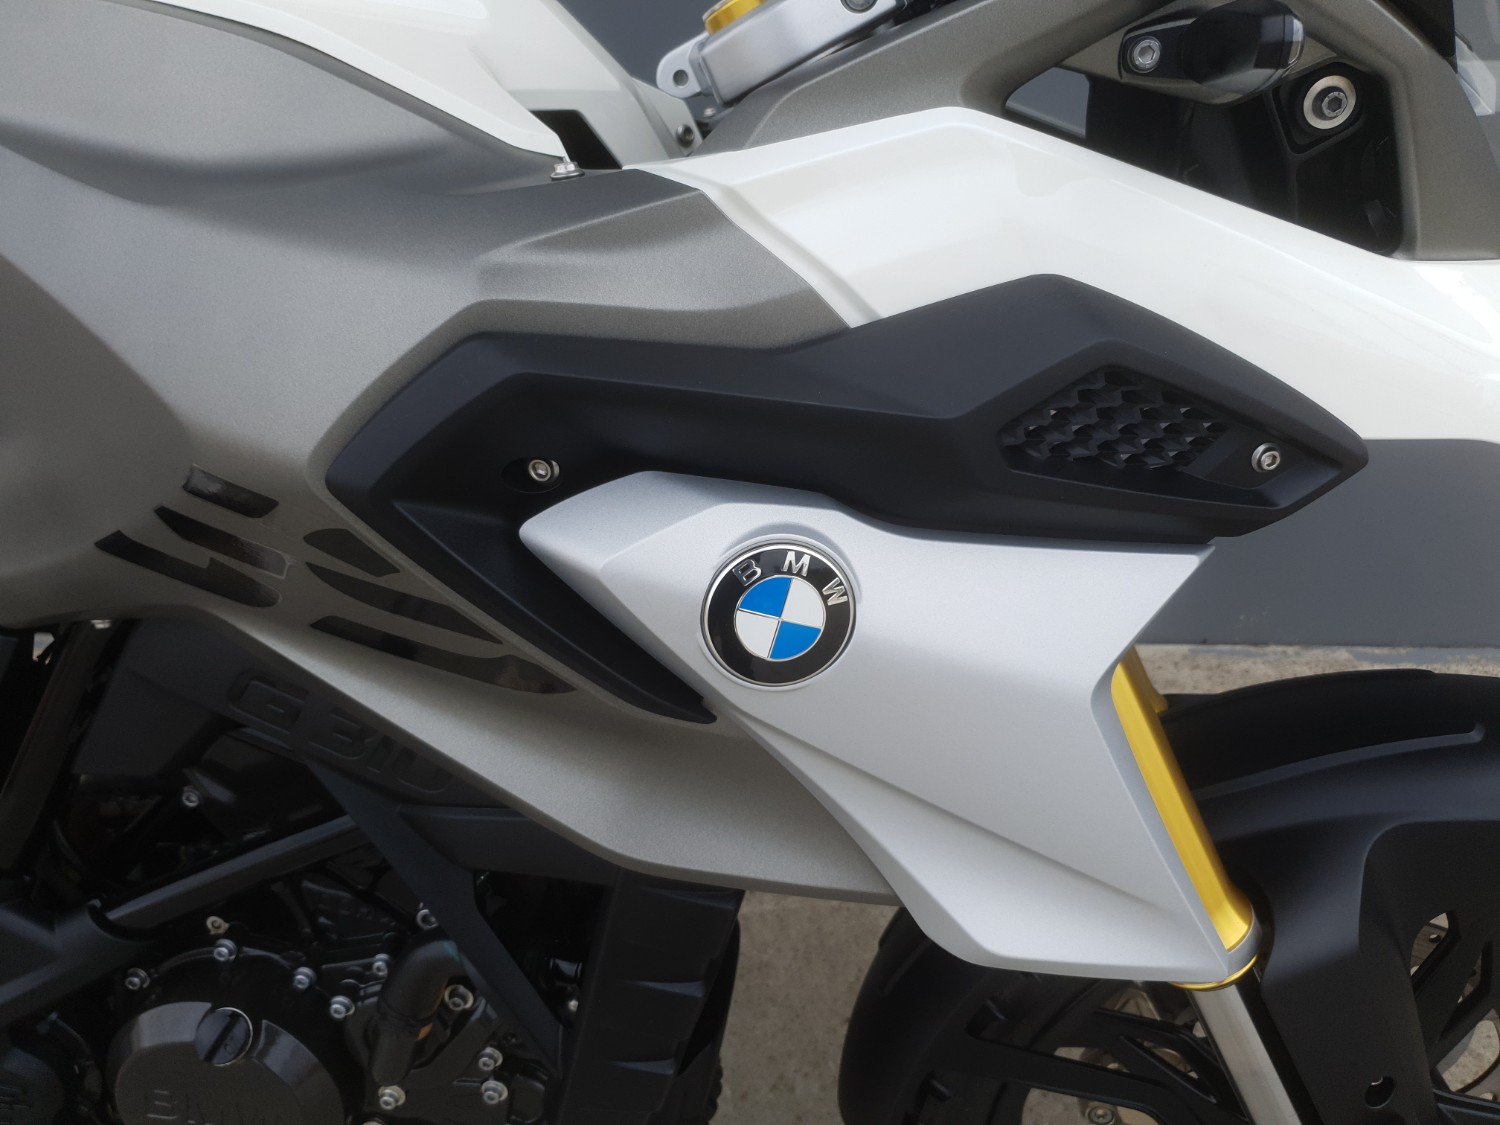 2021 BMW G 310 GS Motorcycle Image 21